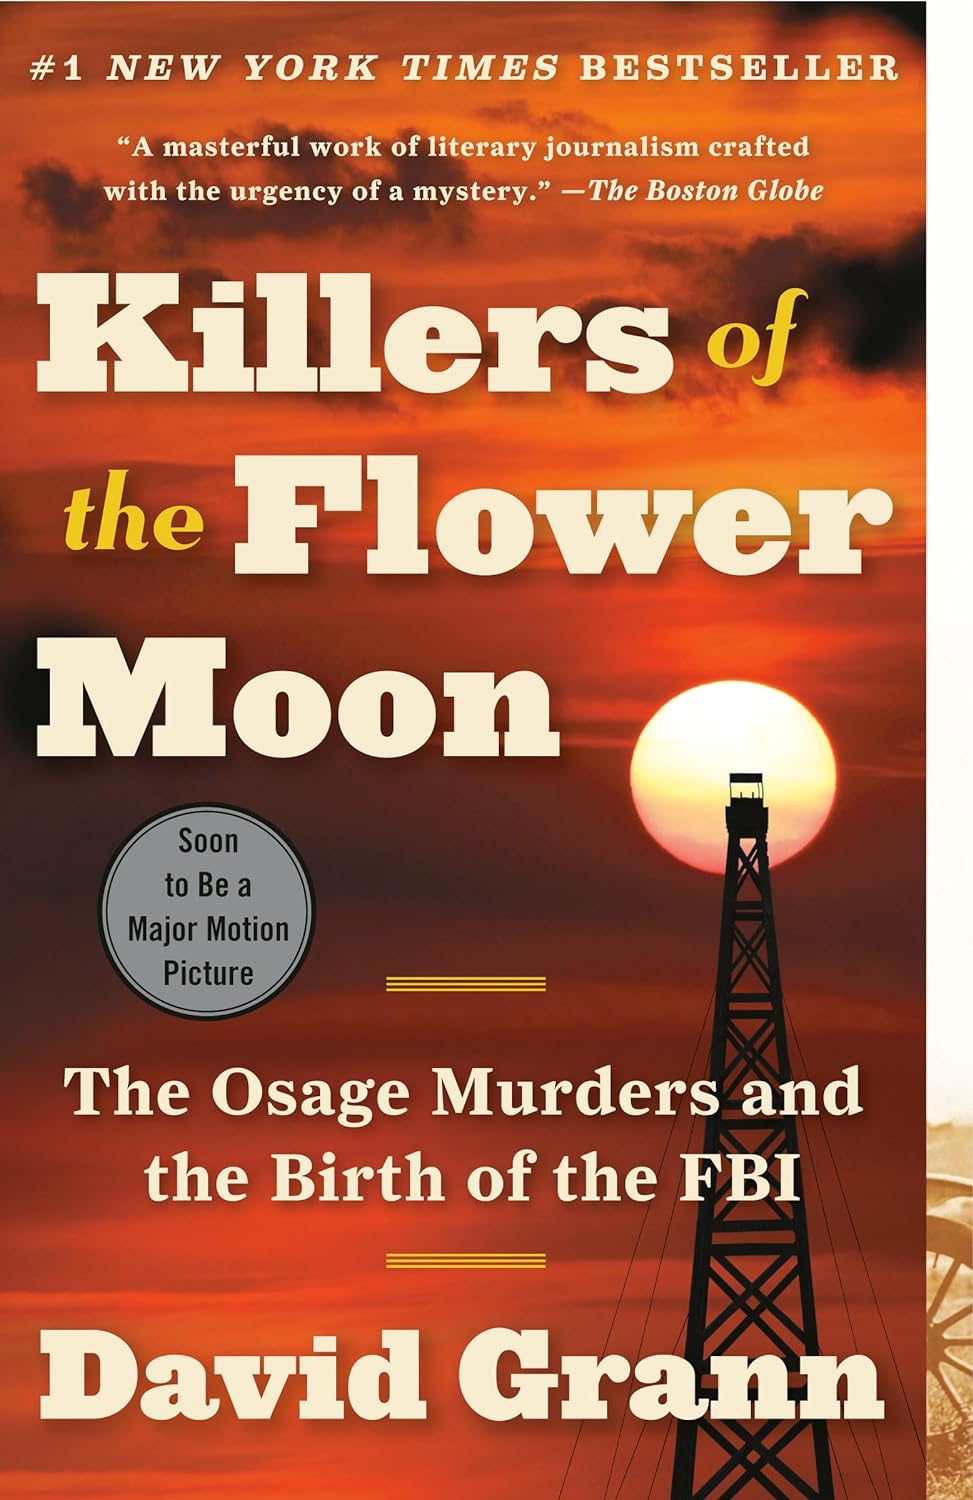 Killers of the Flower Moon by David Grann | Book Review